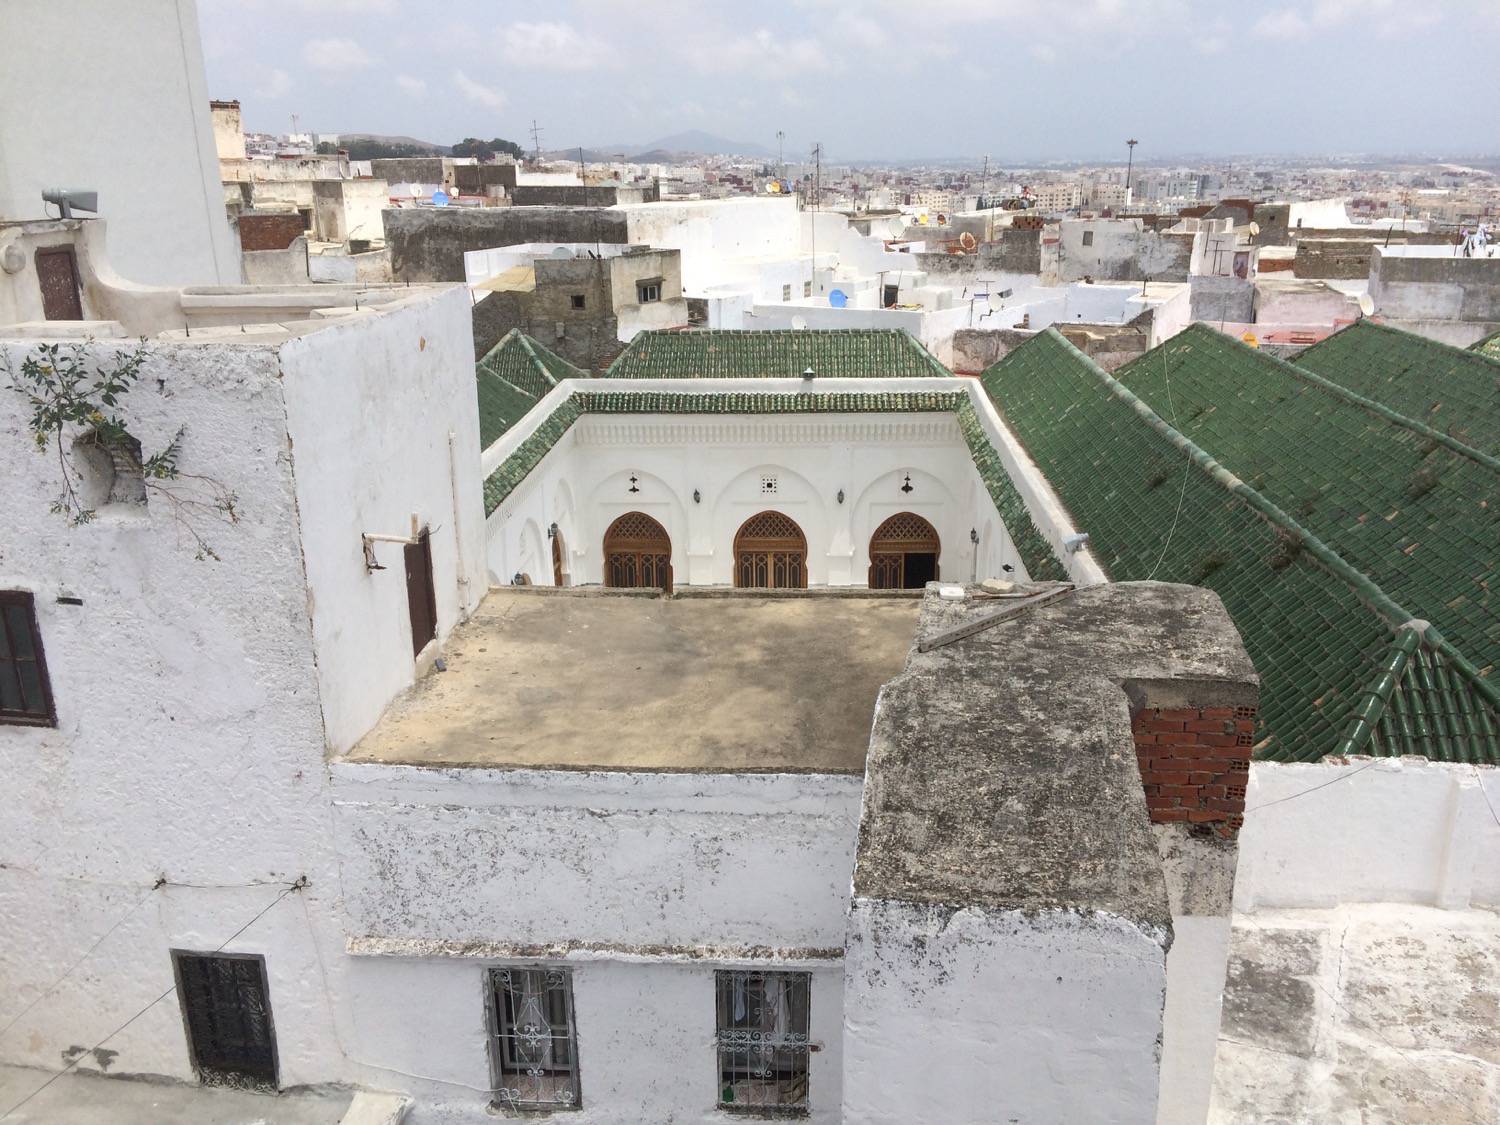 View down to the sahn from the rooftop of Dar Ben Jelloun, wood screens on the arcades visible